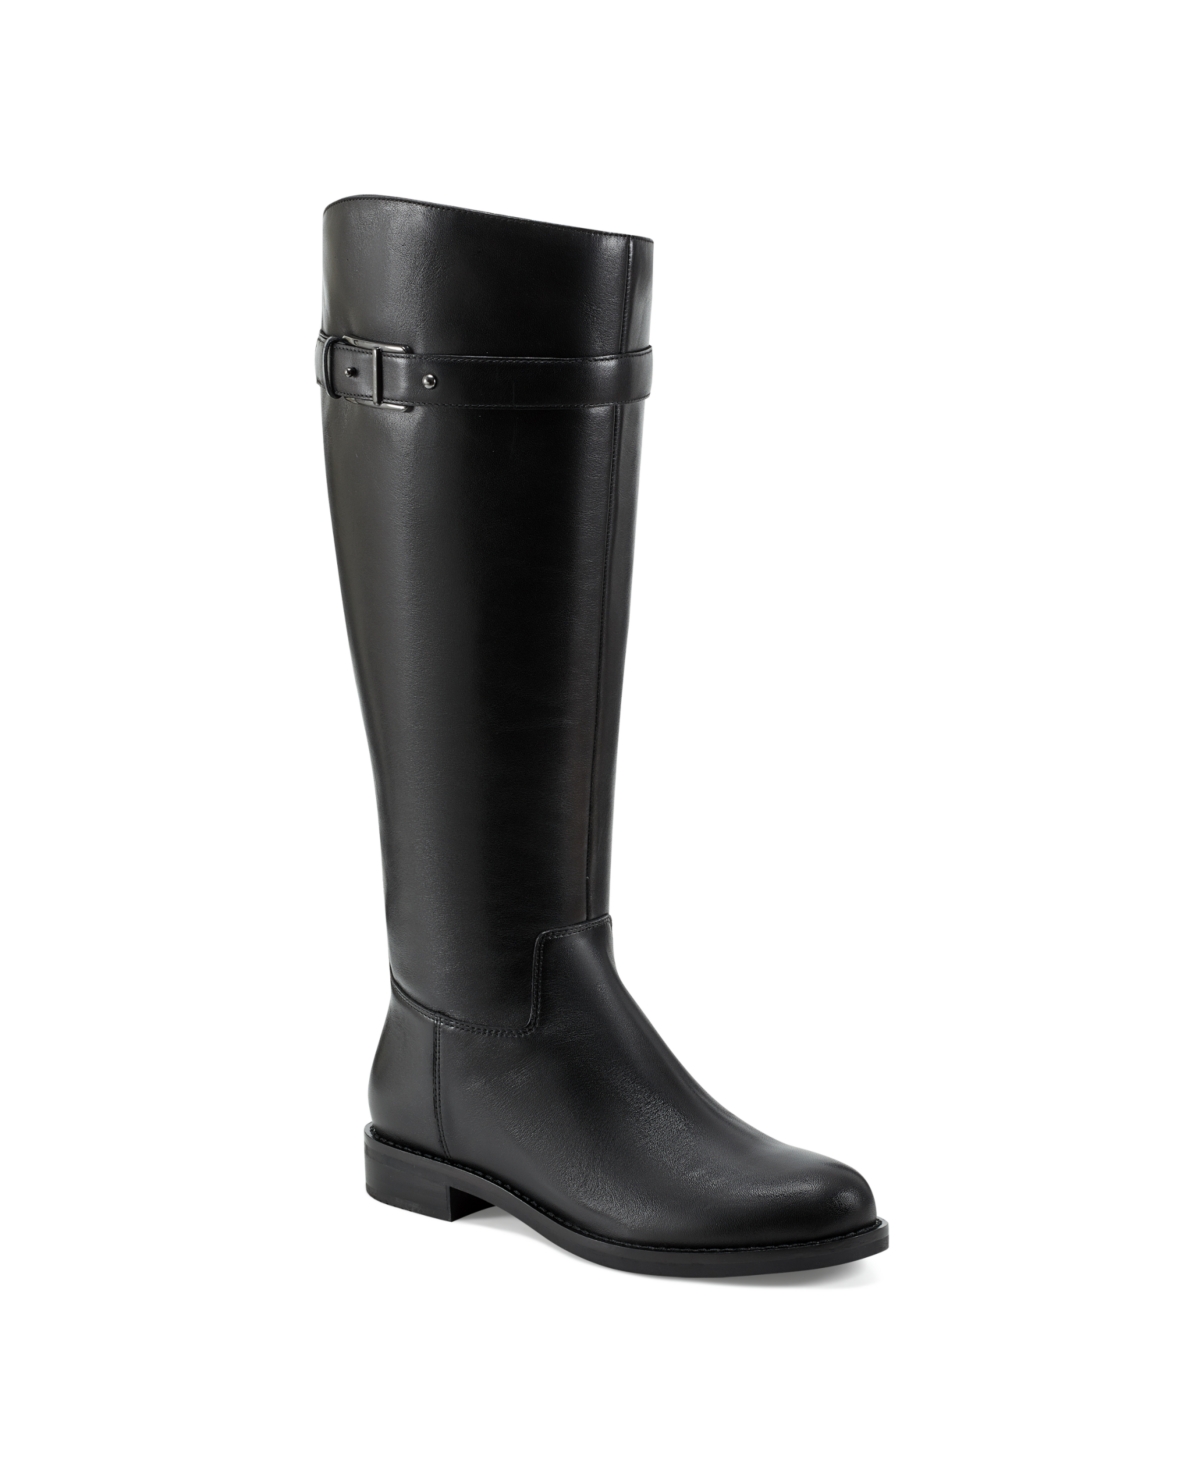 Women's Aubrey Wide Calf Round Toe Casual Riding Boots - Black Leather